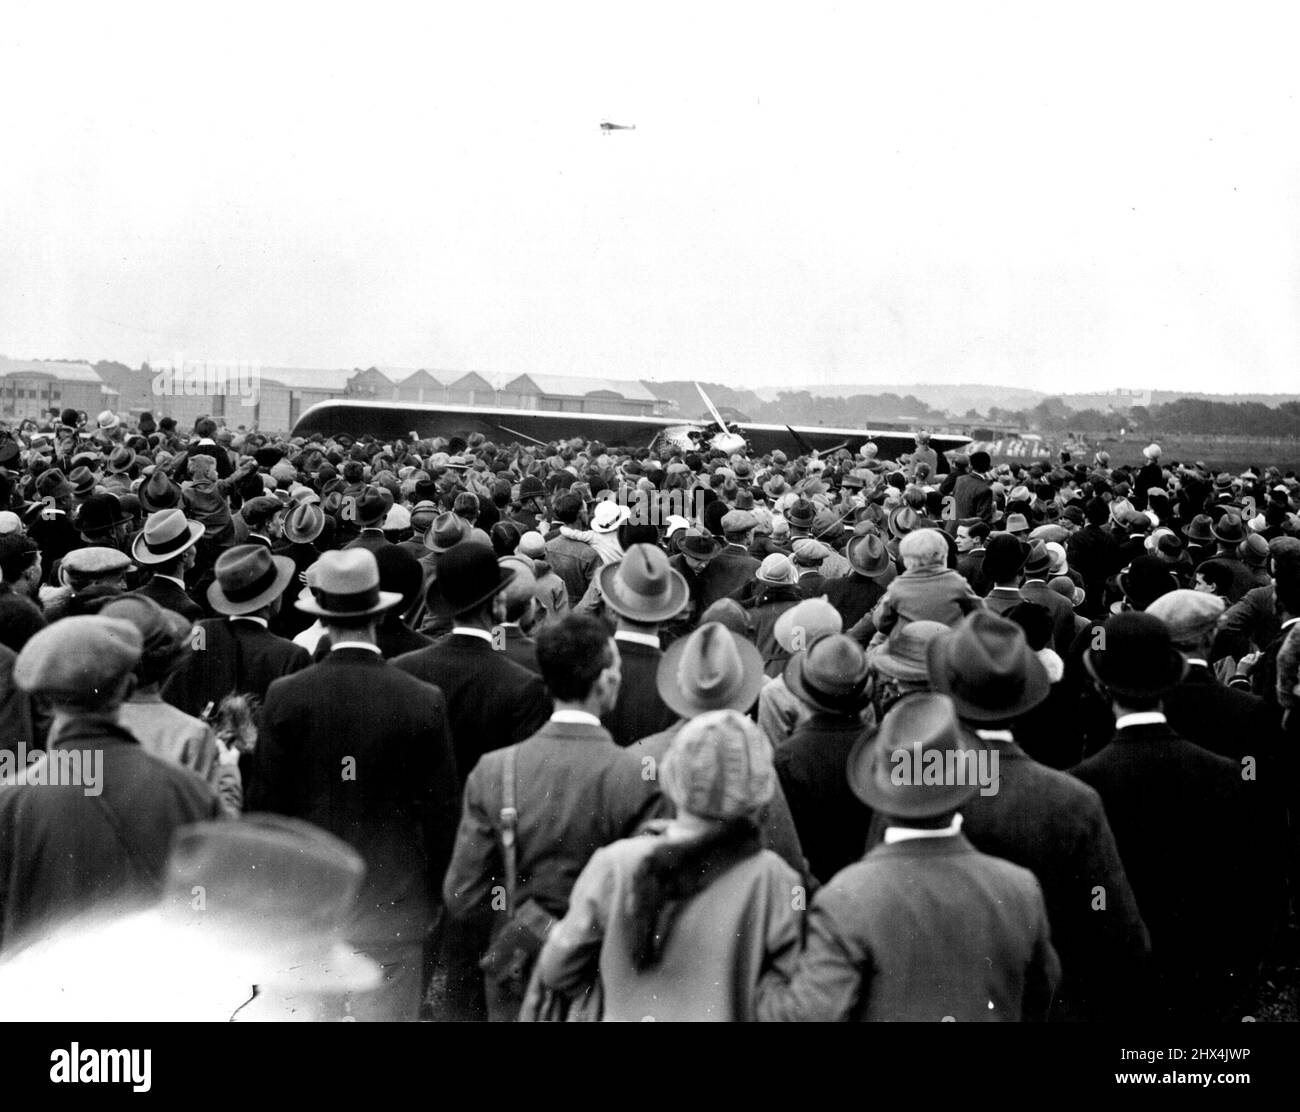 London's Magnificent welcome to capt. Charles Lindbergh, the hero of the Trans-Atlantic Flight. An Enormous crowd of over 100,000 Assembled at Croydon Aerodrome on Sunday, May 29th, to welcome Capt. Lindbergh as he arrived from Brussels. Aeroplanes Escorted him from the English coast to the Aerodrome. A general view of the crowd surging round the plane immediately it landed. July 06, 1927. Stock Photo